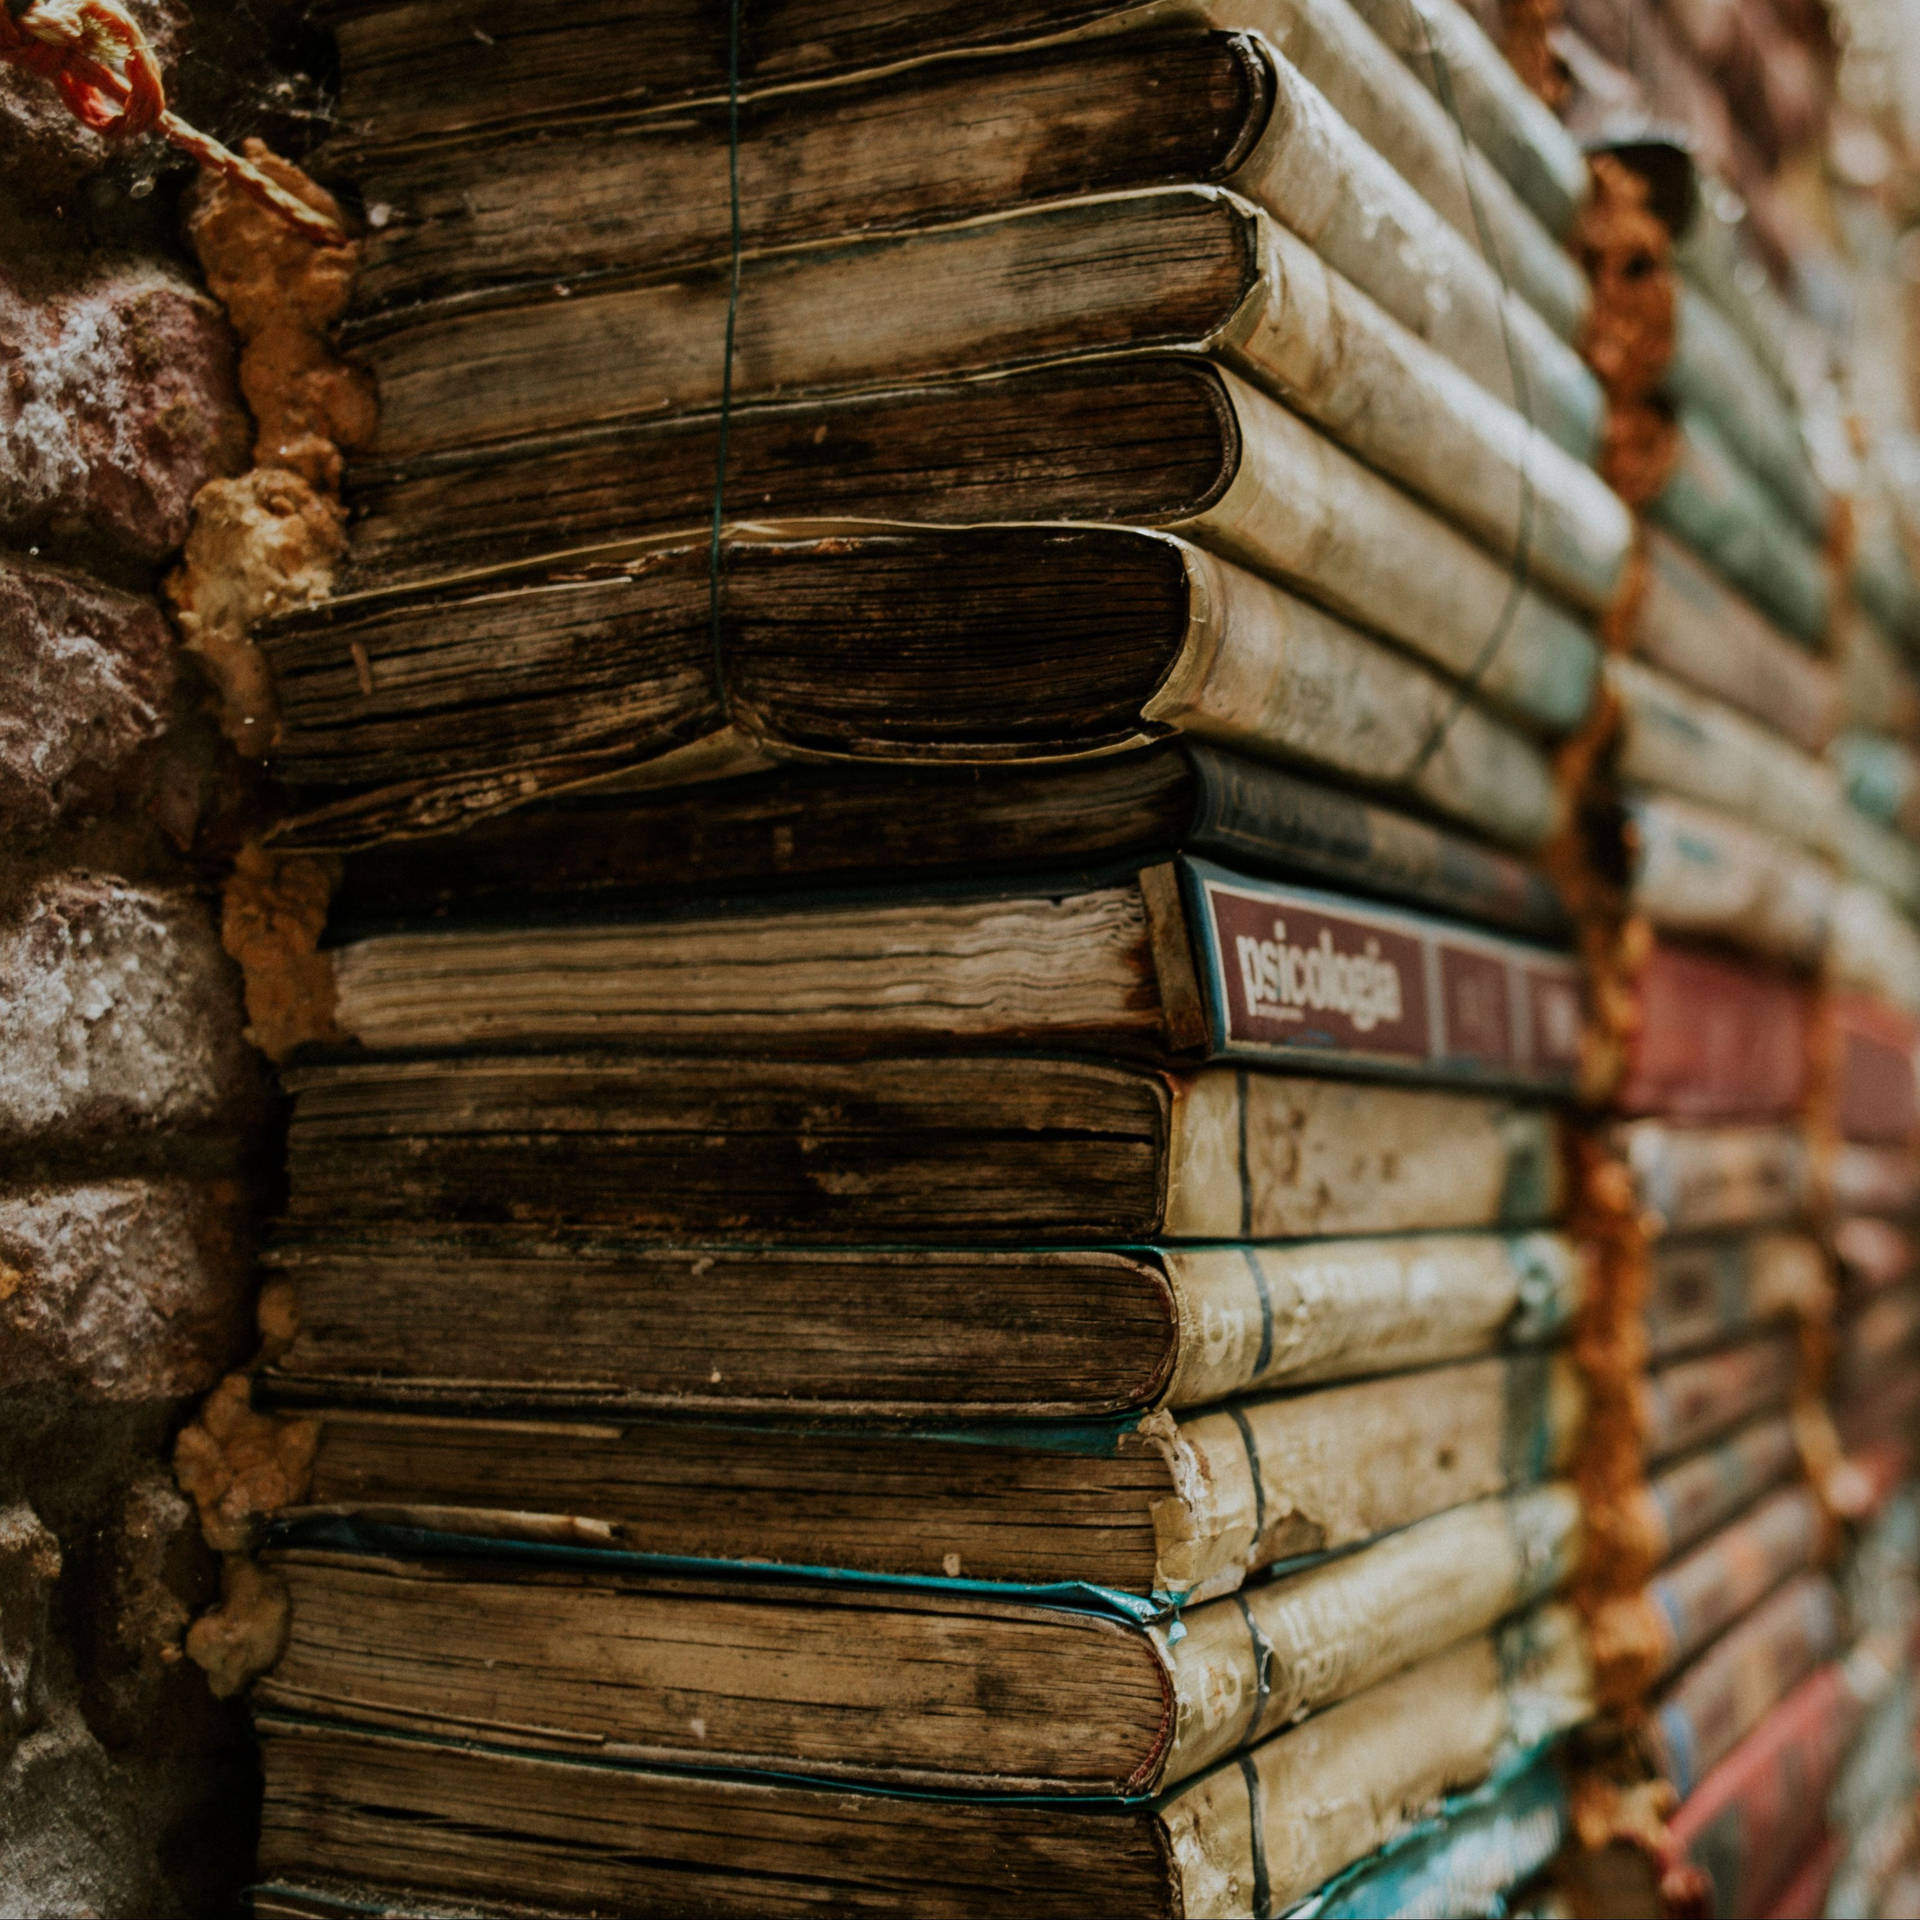 Piled Books With Worn-out Book Cover Library Wallpaper